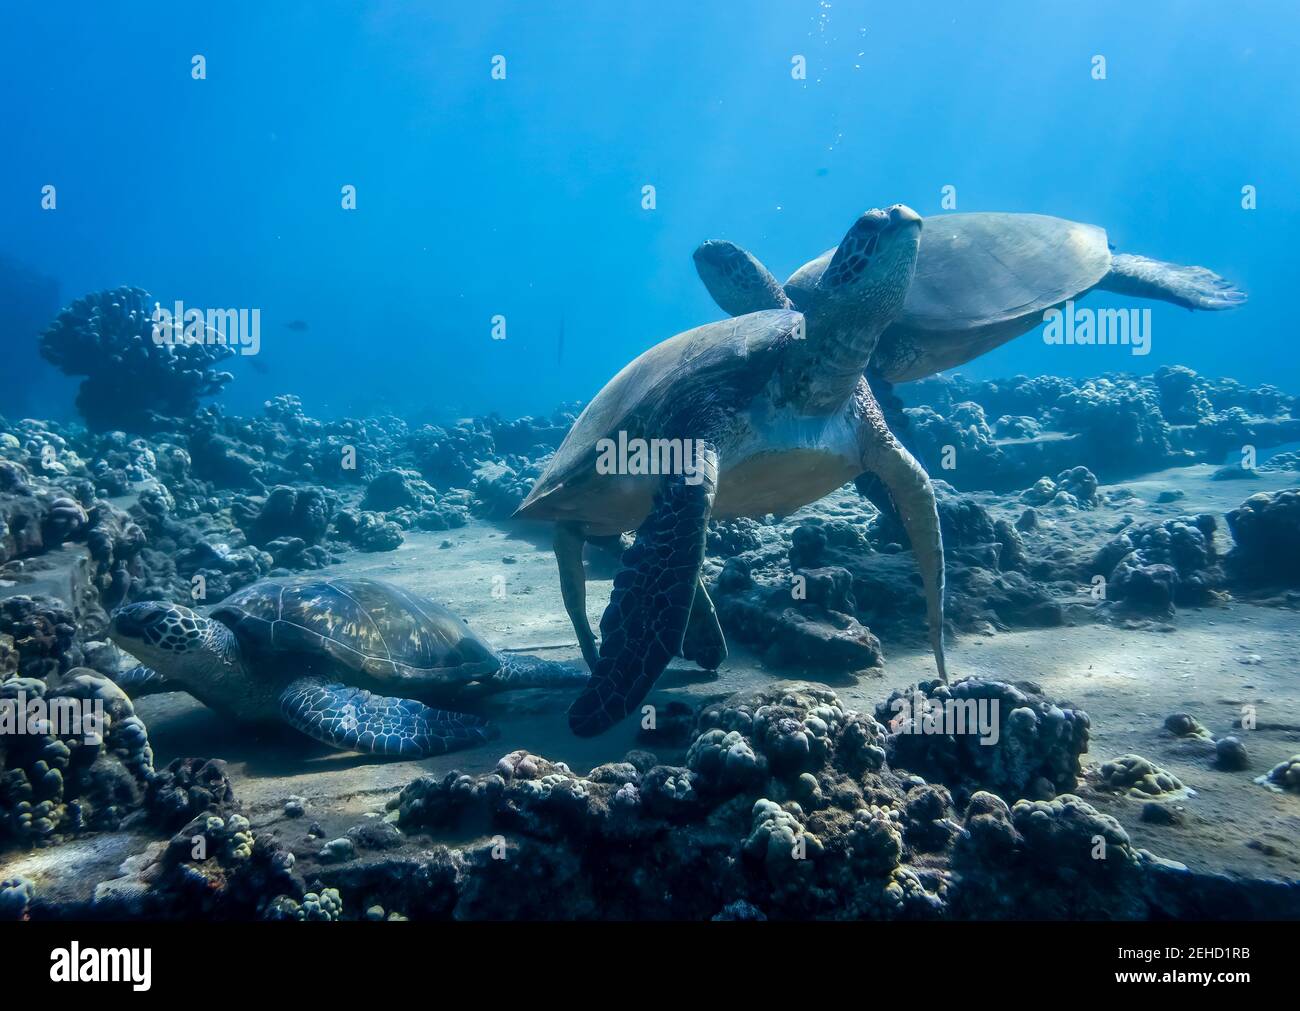 Hawaiian green sea turtles relaxing on reef cleaning station in underwater image. Stock Photo